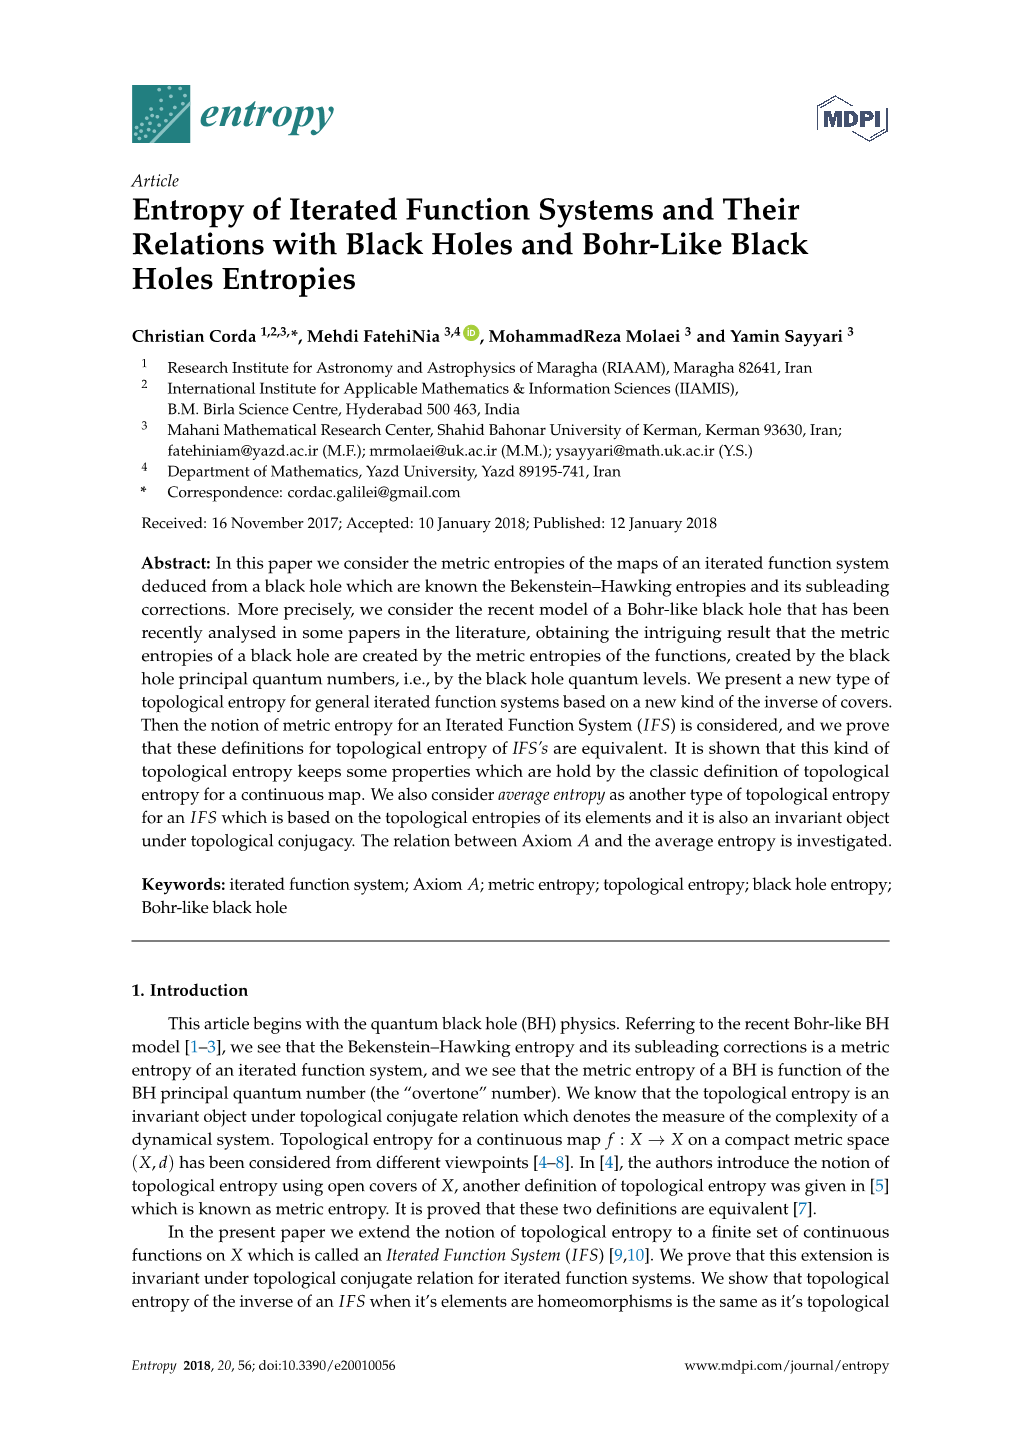 Entropy of Iterated Function Systems and Their Relations with Black Holes and Bohr-Like Black Holes Entropies